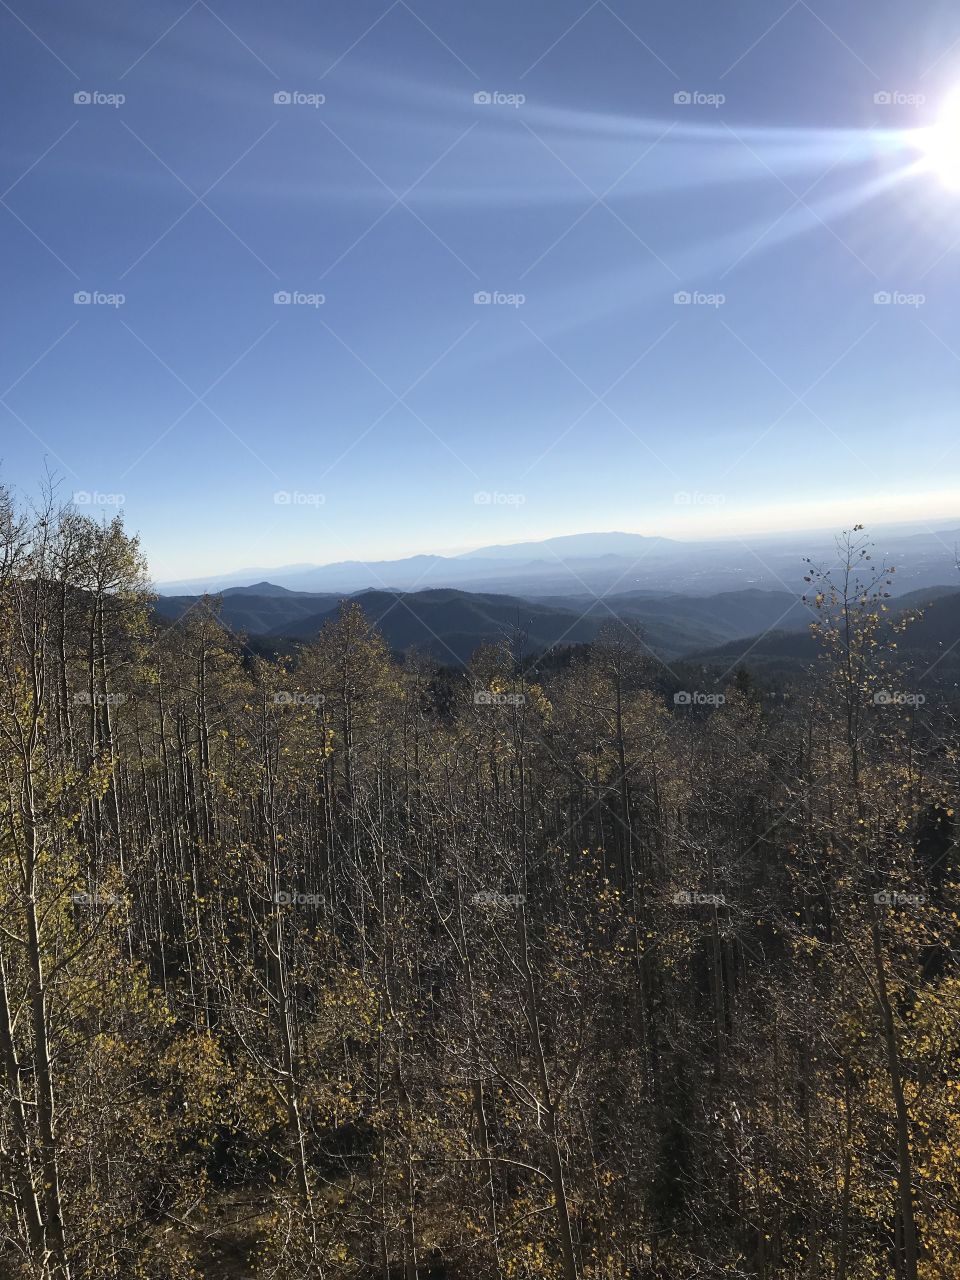 Beautiful view from a glorious mountain near Santa Fe New Mexico.  Fall trees with the fantastic array of mountains within the background. This is a picture to show your adventurous side of life.